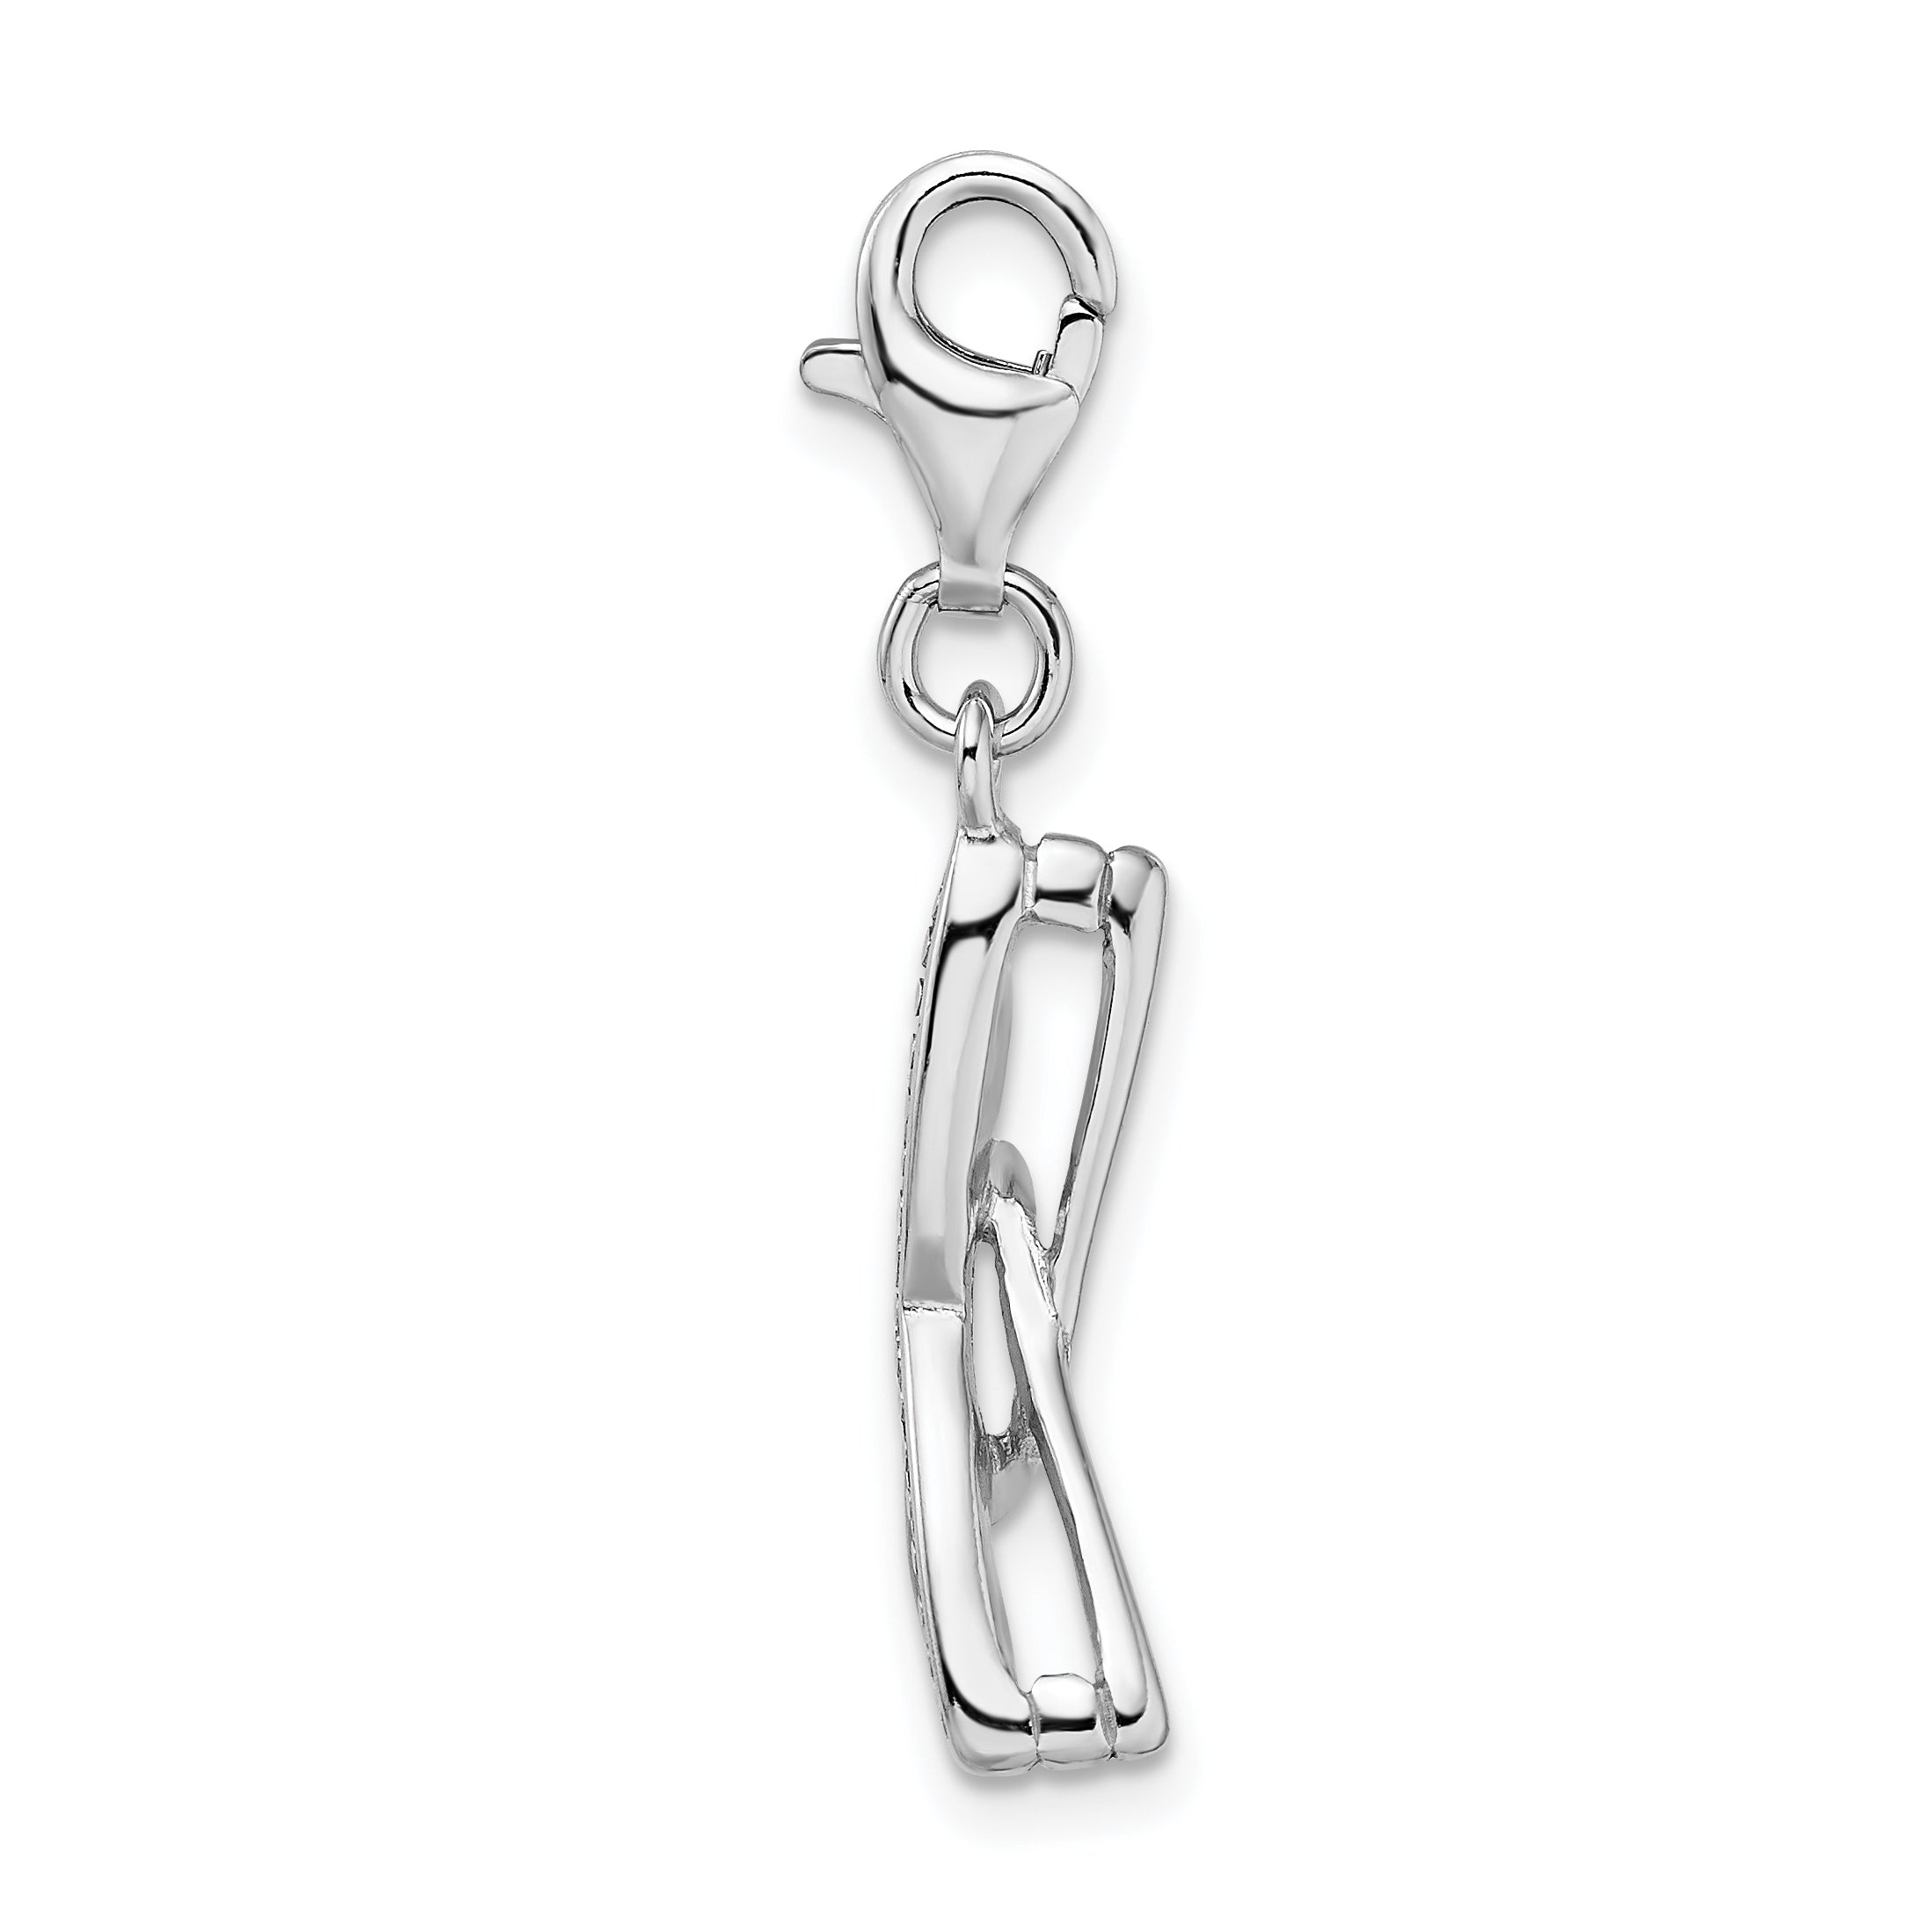 Amore La Vita Sterling Silver Rhodium-plated Polished3-D  Enameled Sunglass Charm with Fancy Lobster Clasp